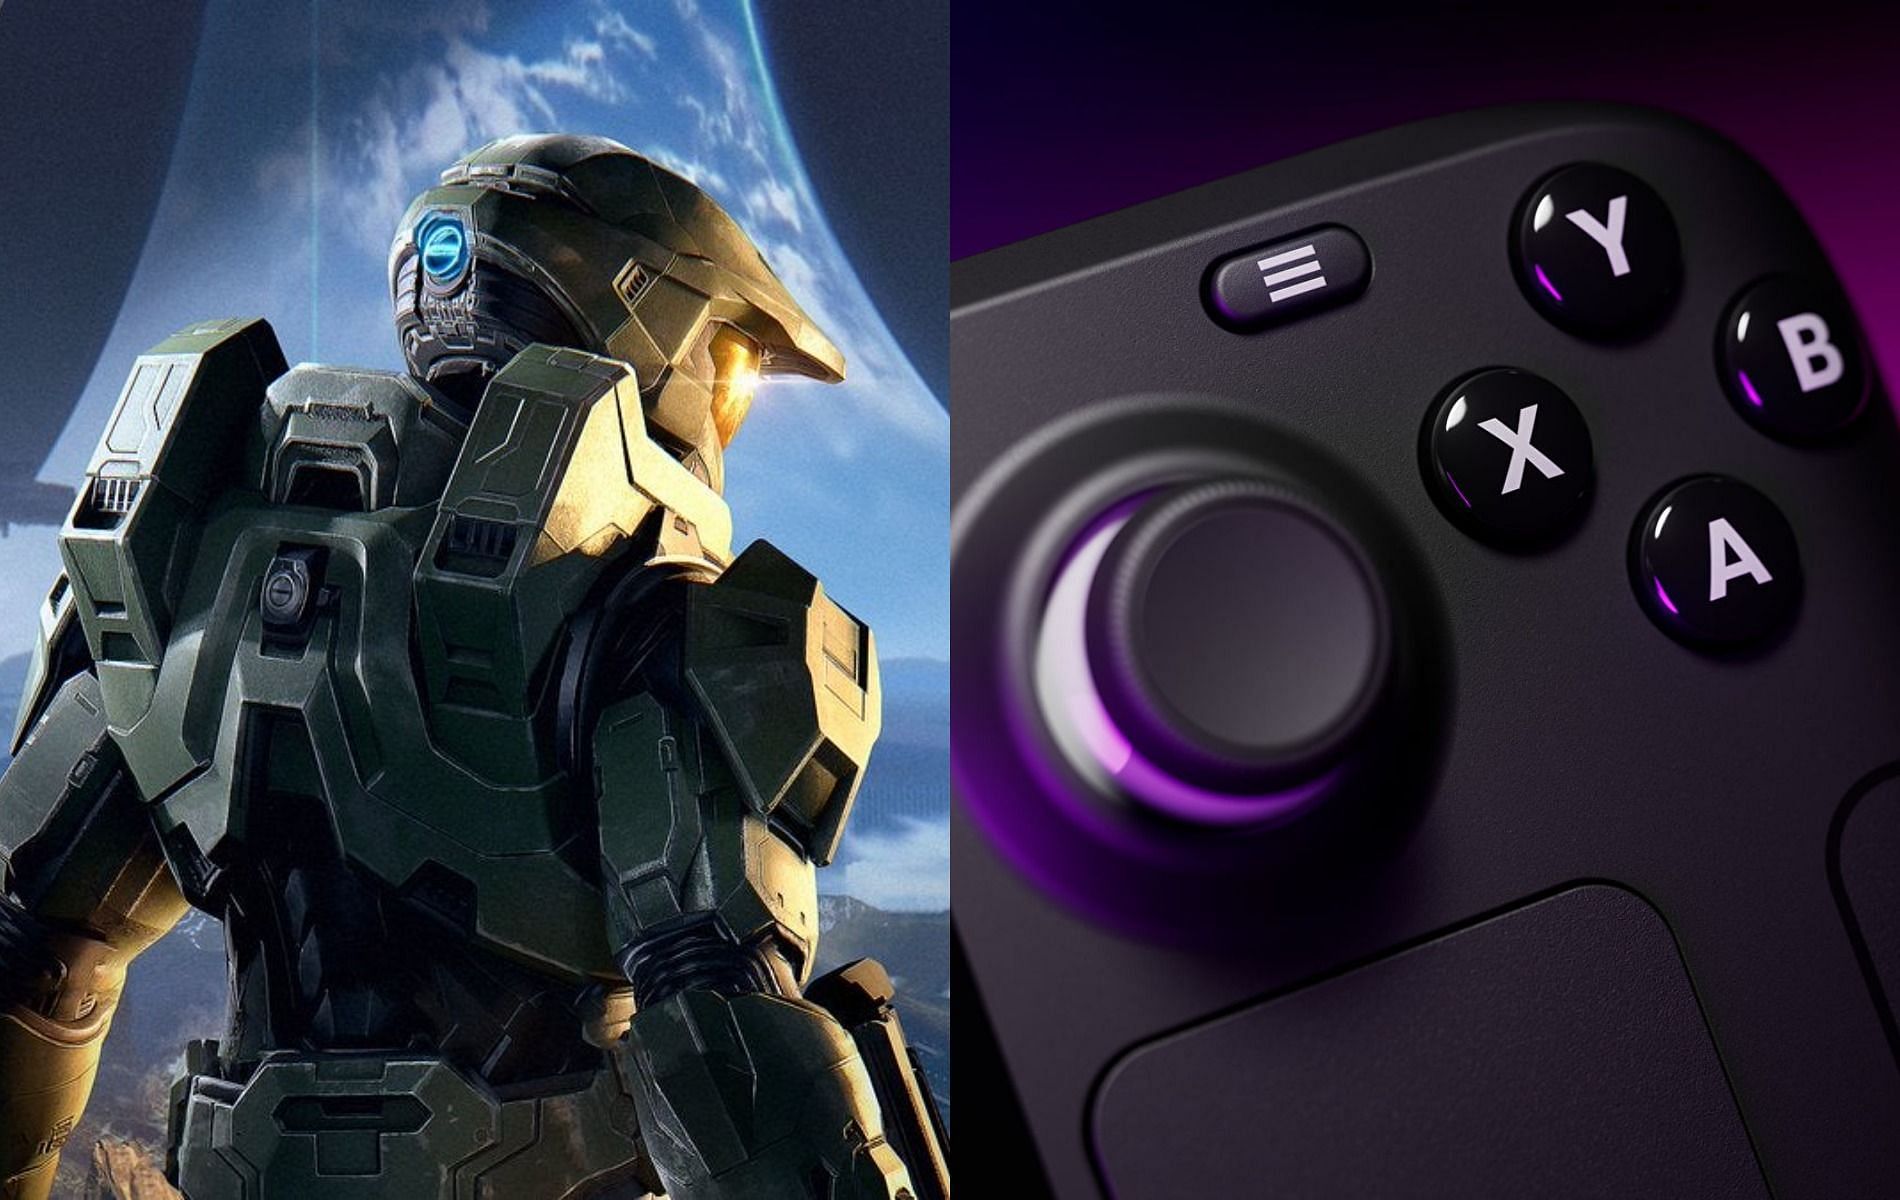 Valve is still working on adding support for Halo Infinite on the Deck (Images via Halo Infinite and Valve)